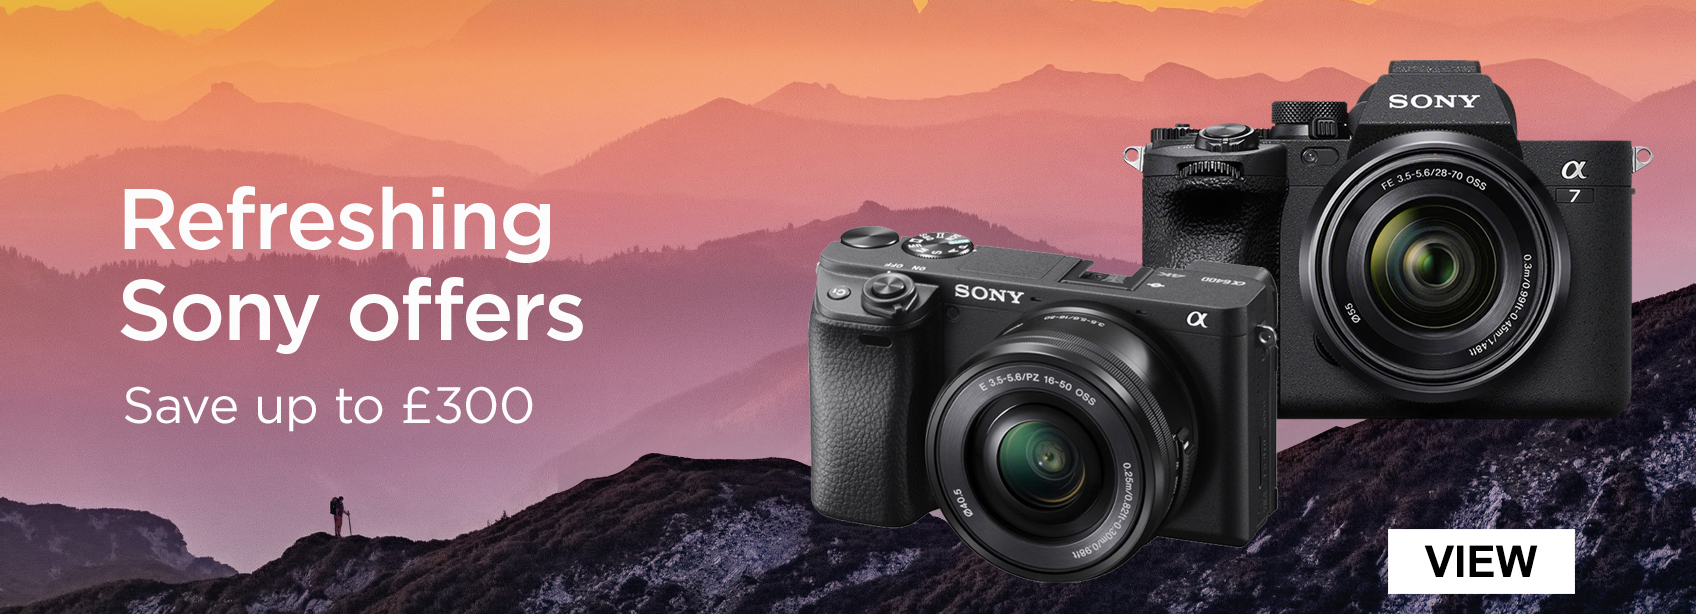 Refreshing Sony offers. Save up to £300. 